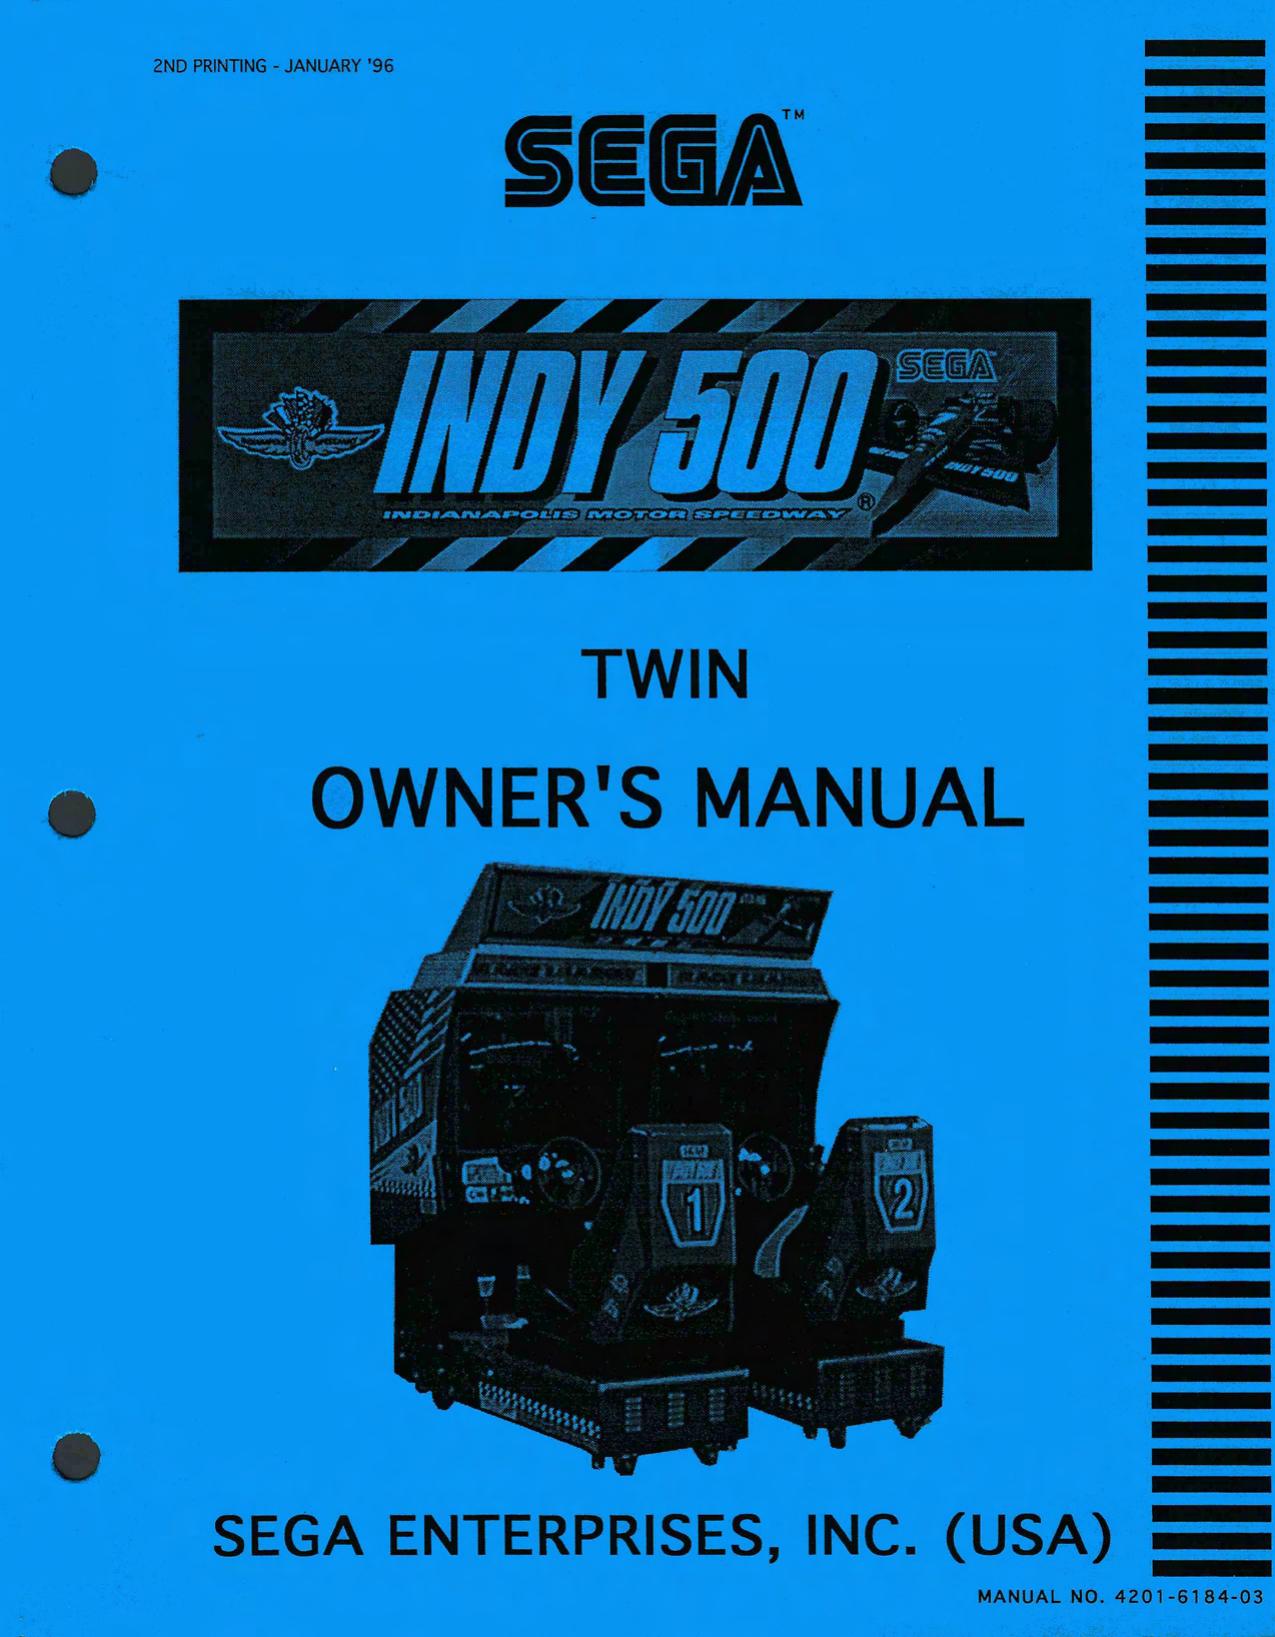 Indy 500 Twin Owners Manual 2nd Printing Jan 96 (4201-6184-03)